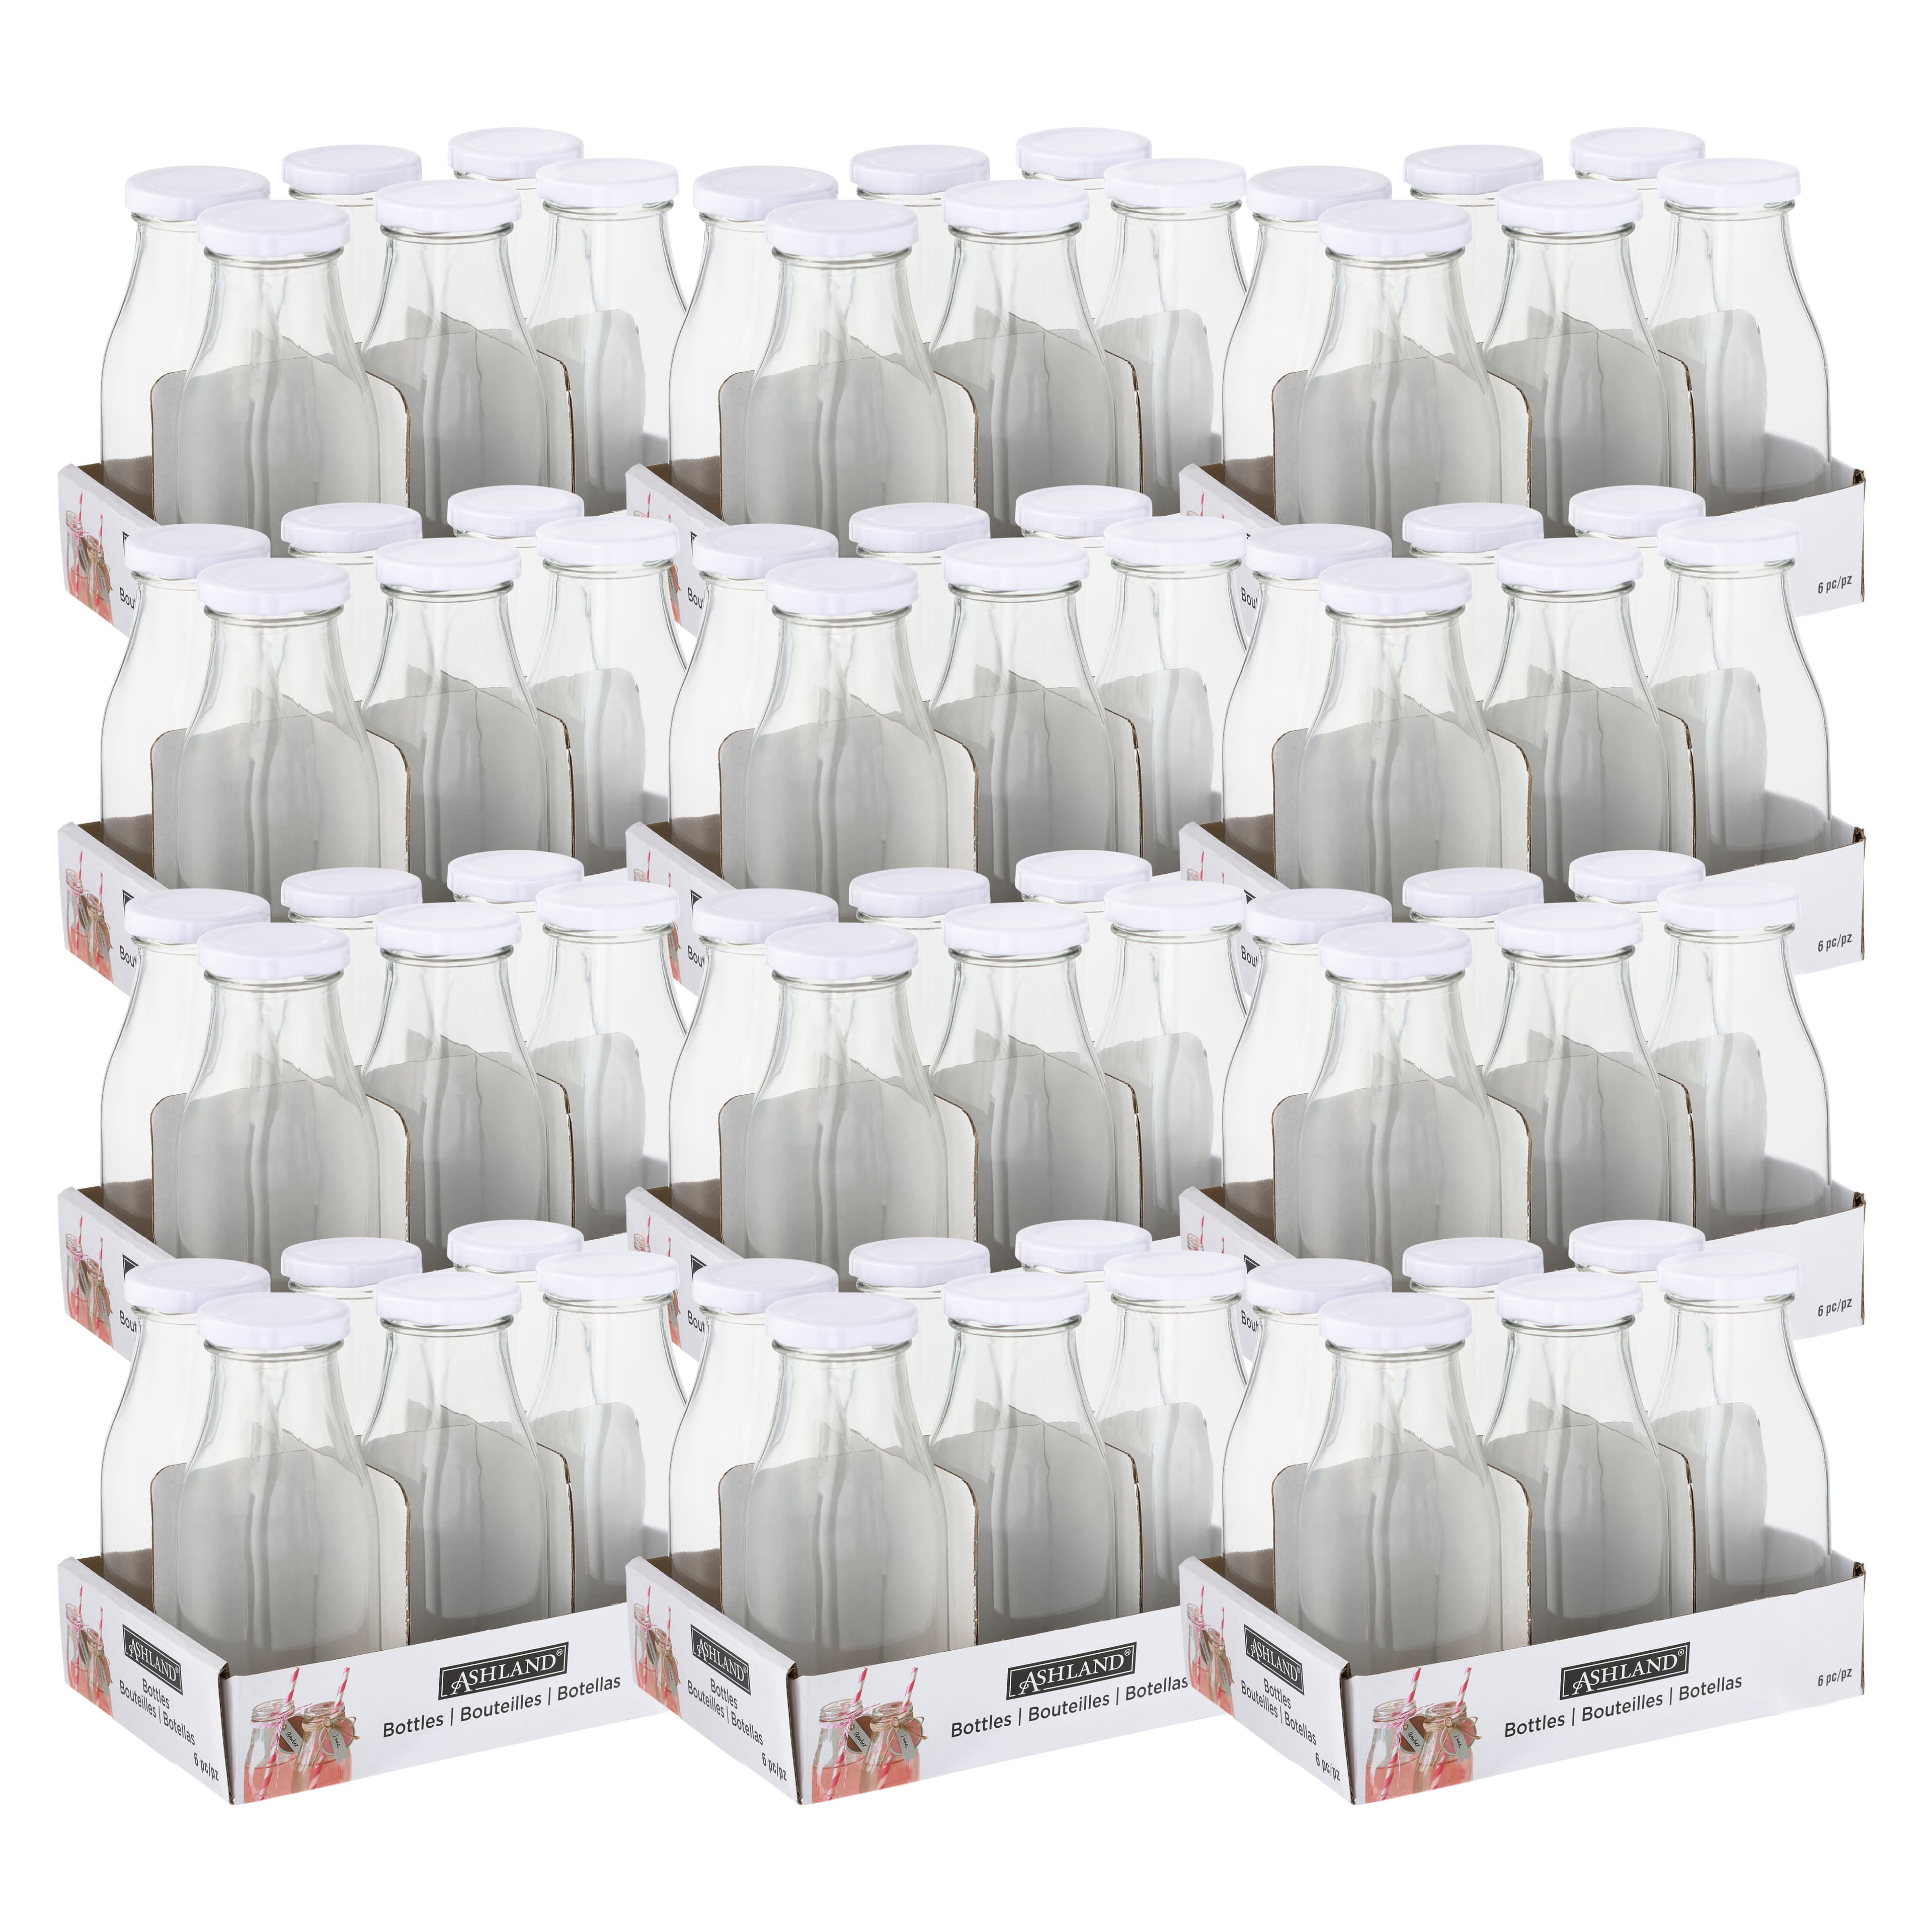 12 Packs: 6 ct. (72 total) 8oz. Glass Milk Bottles with Lids by Ashland® 